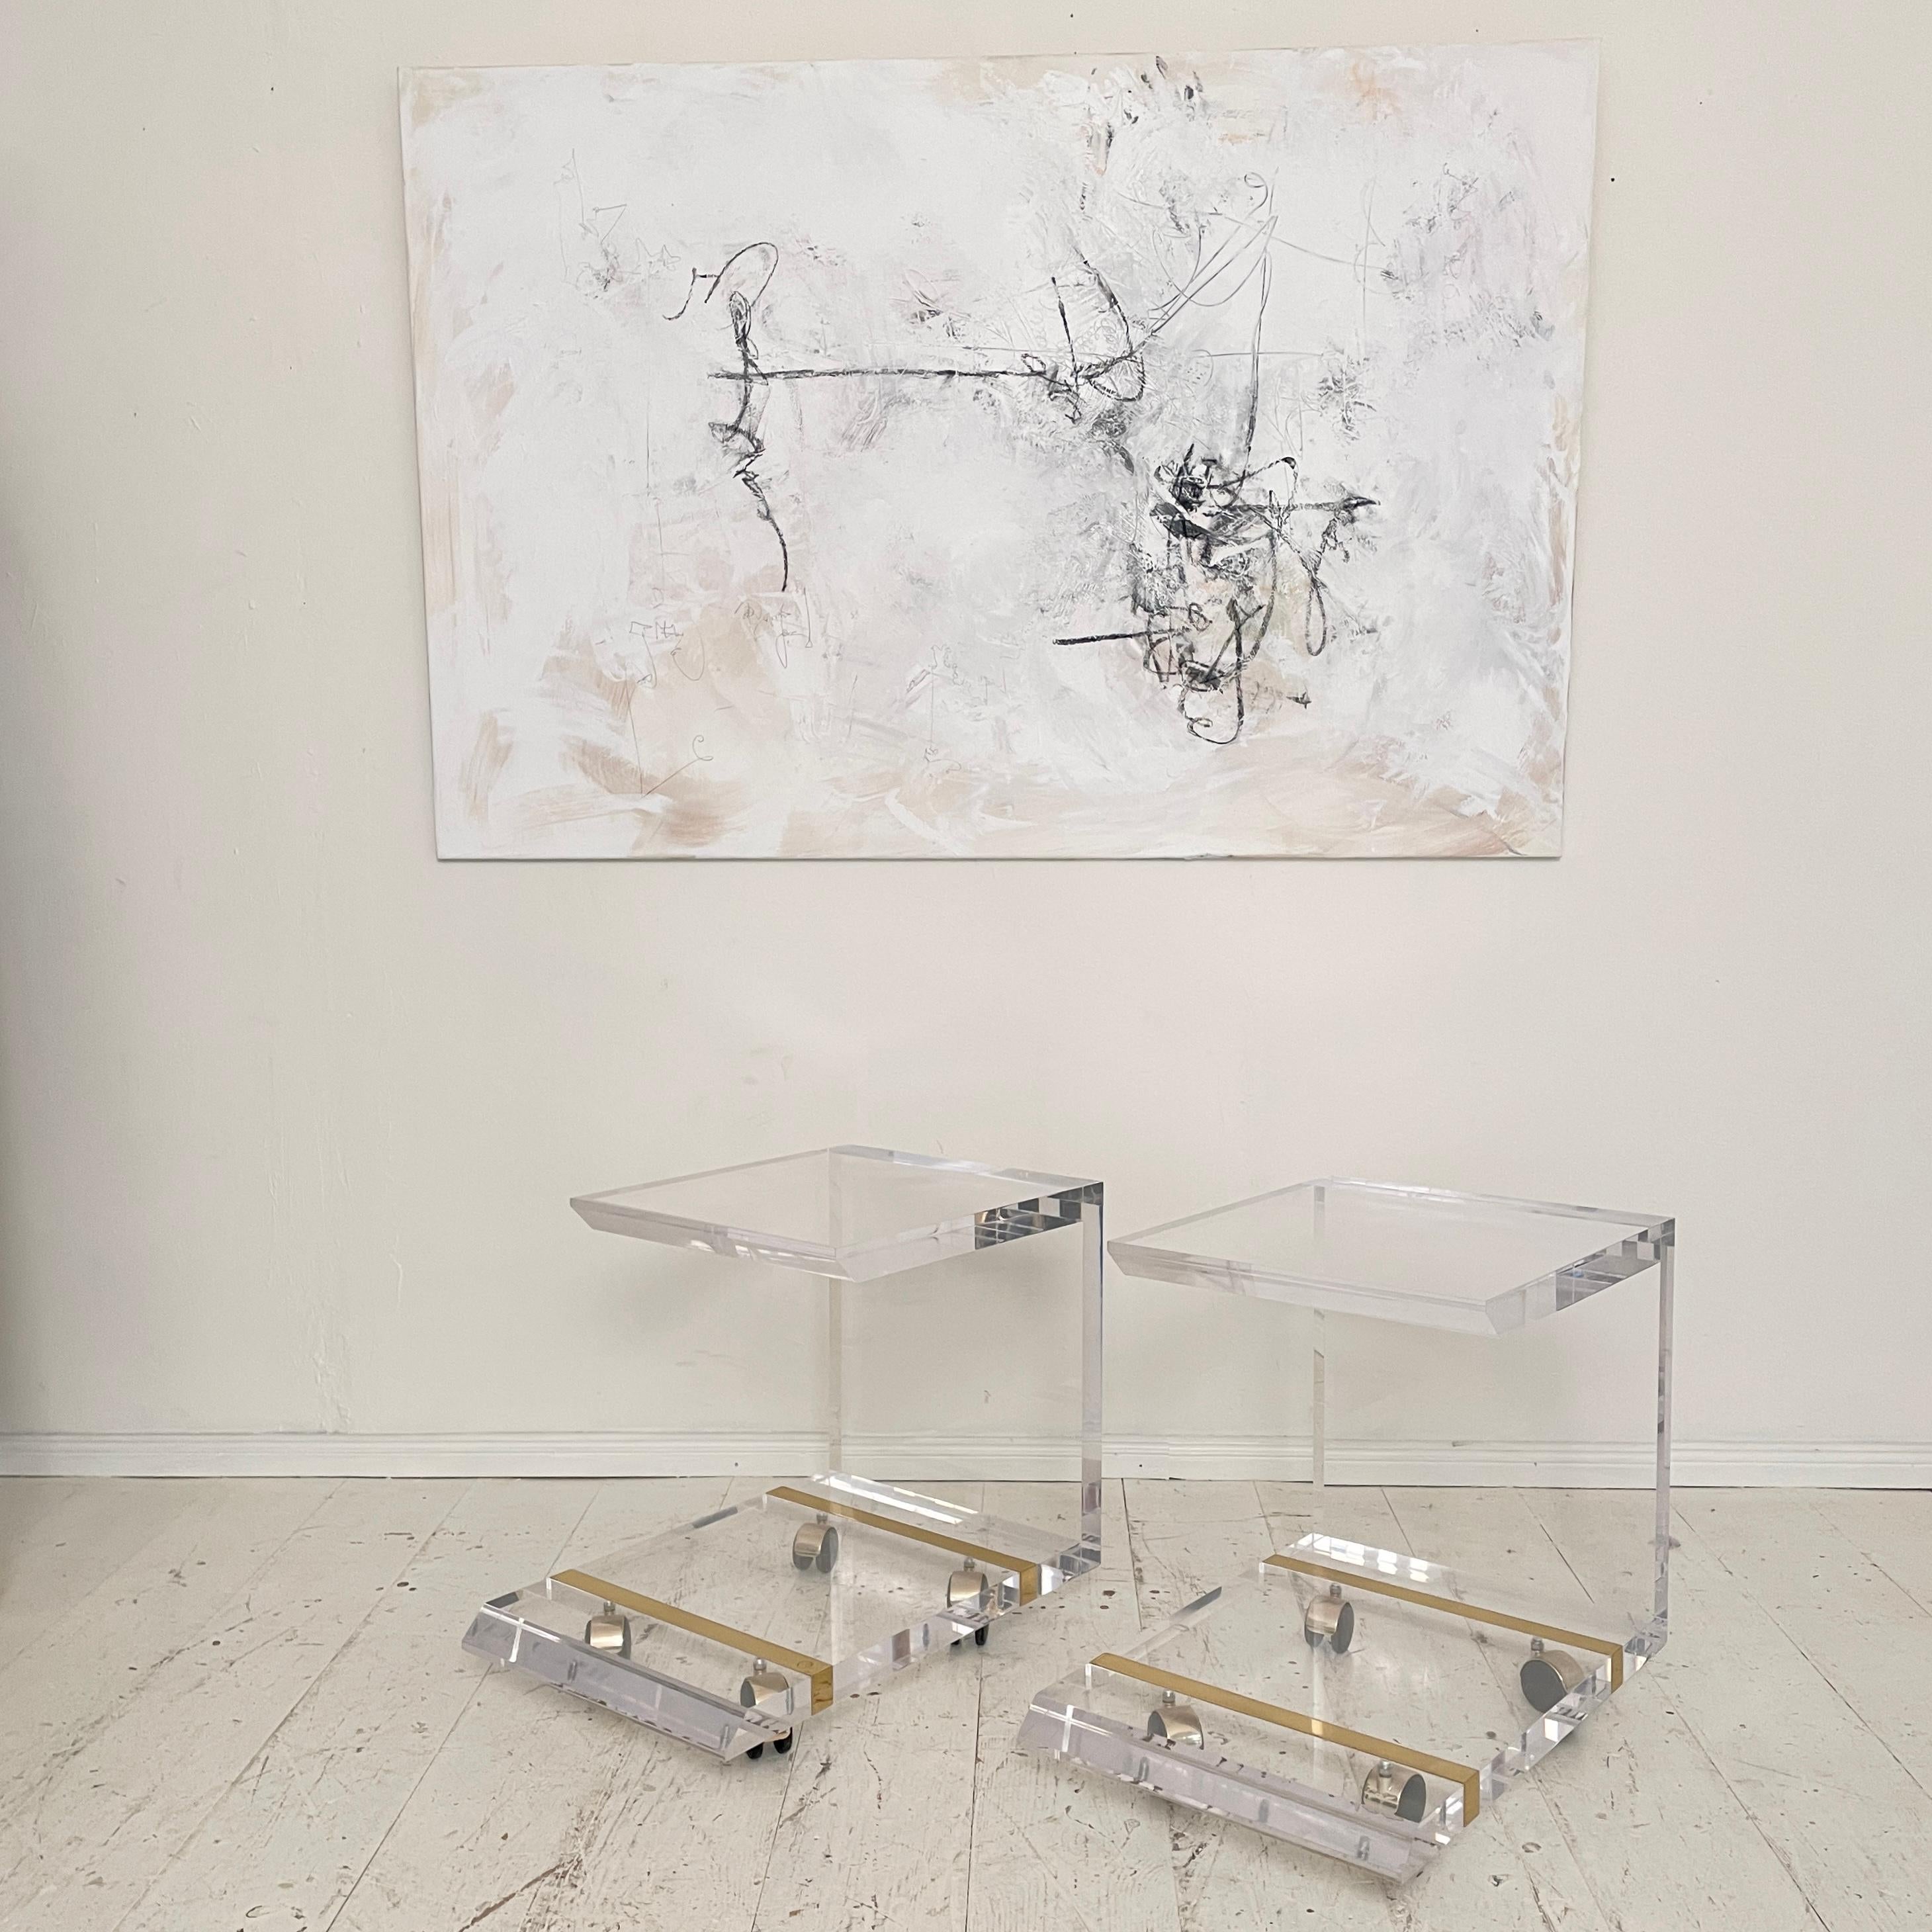 This Pair midcentury Side Tables by Charles Hollis Jones made around 1970. They are made out of Acrylic and Brass. The Tables are on wheels.
Great original condition and Patina.
A unique piece which is a great eye-catcher for your antique, modern,